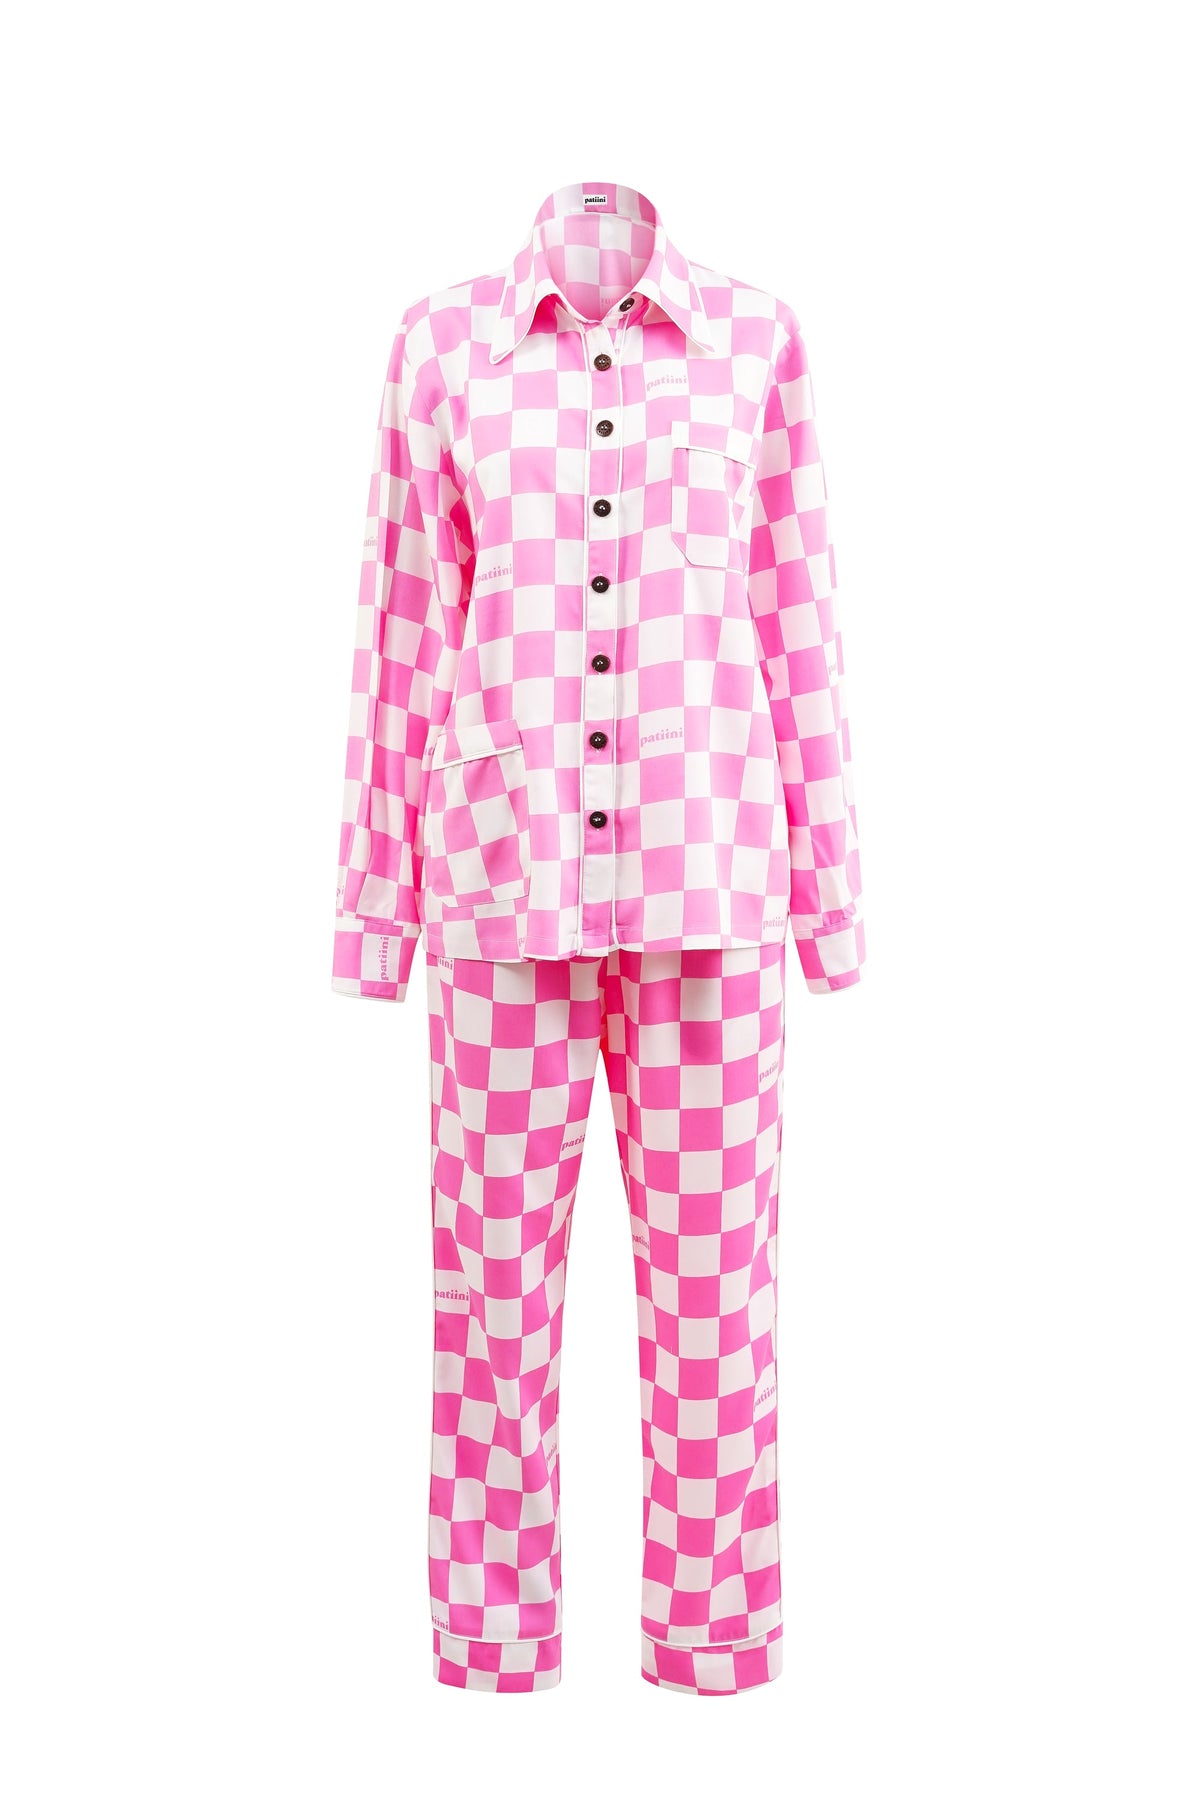 Pink and white checker long-sleeve pajamas with white piping.